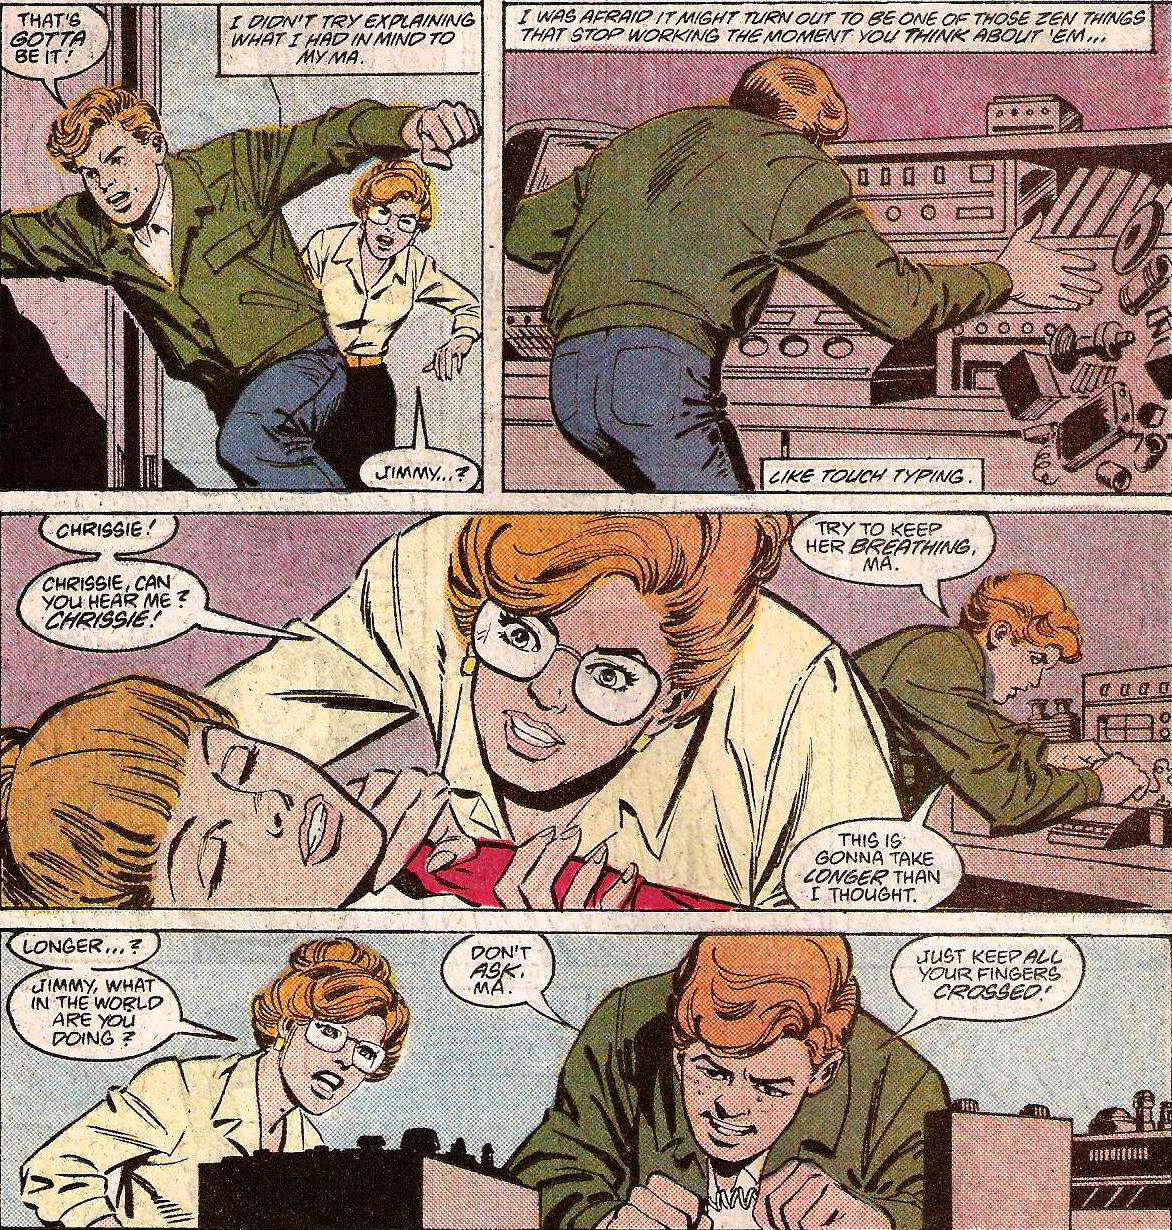 From World of Metropolis #4 (1988)